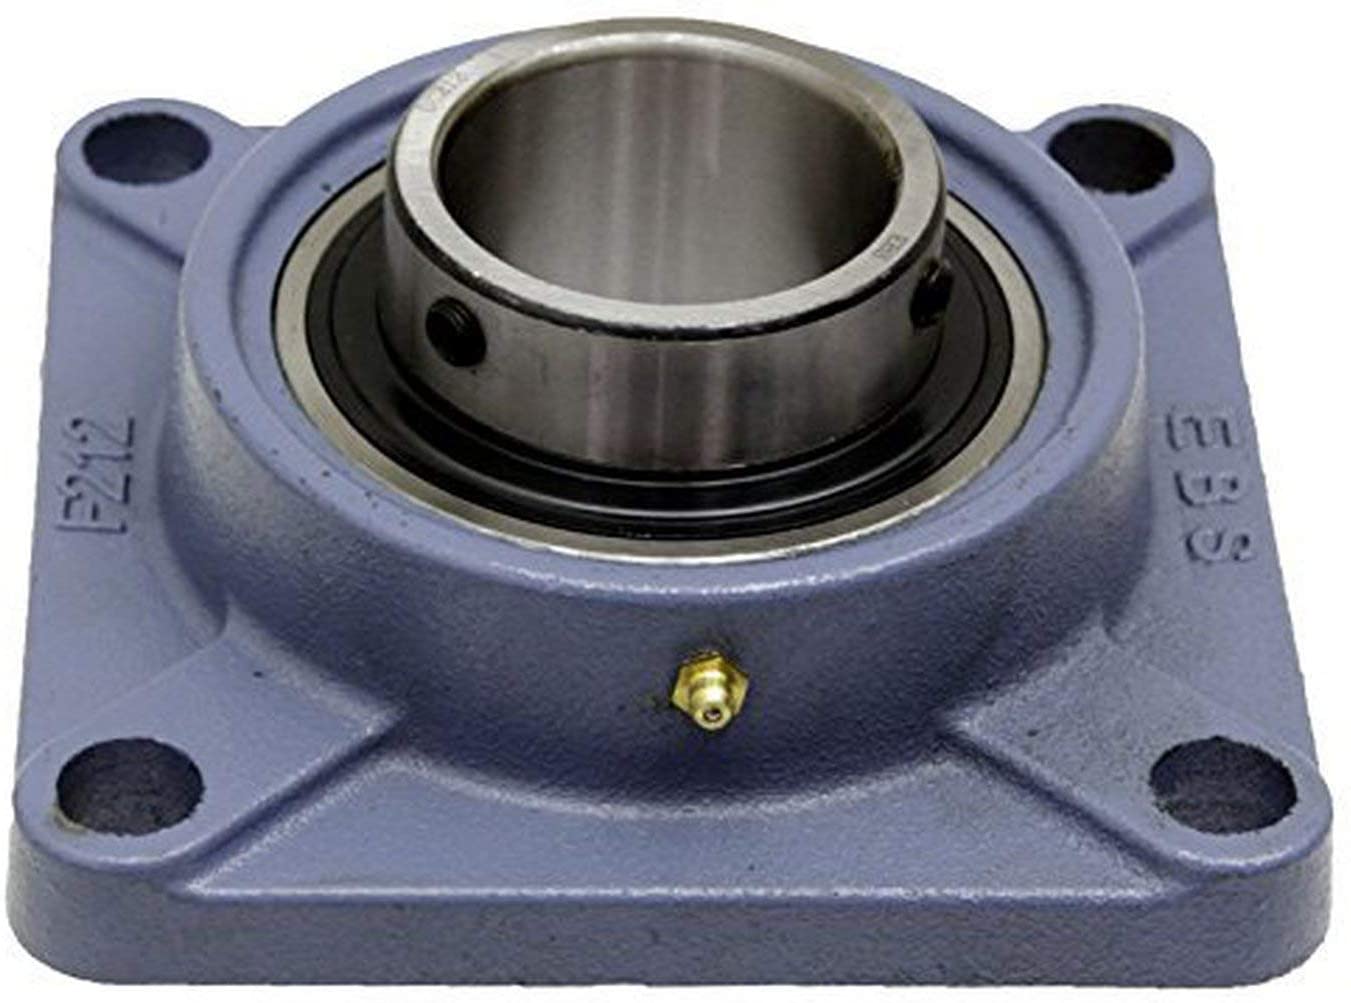 UCF204  GENERIC Normal duty 4 bolt cast iron flange self-lube housed unit - Metric Thumbnail